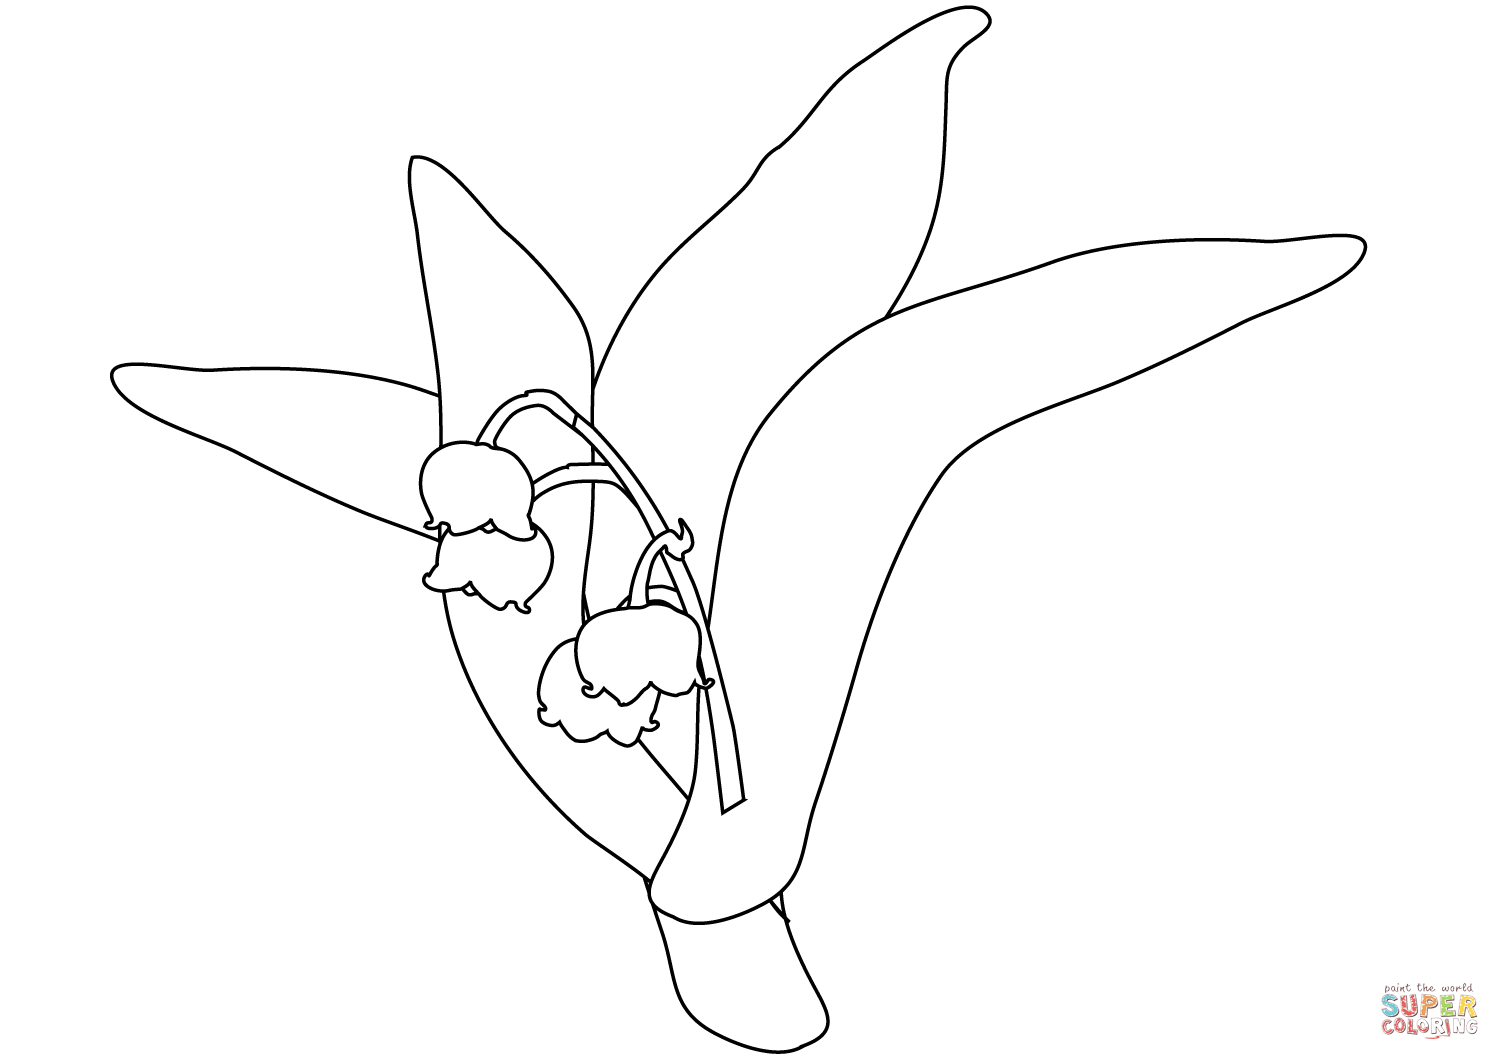 Lily Of The Valley Coloring Page Lily Of The Valley Coloring Page Free Printable Coloring Pages